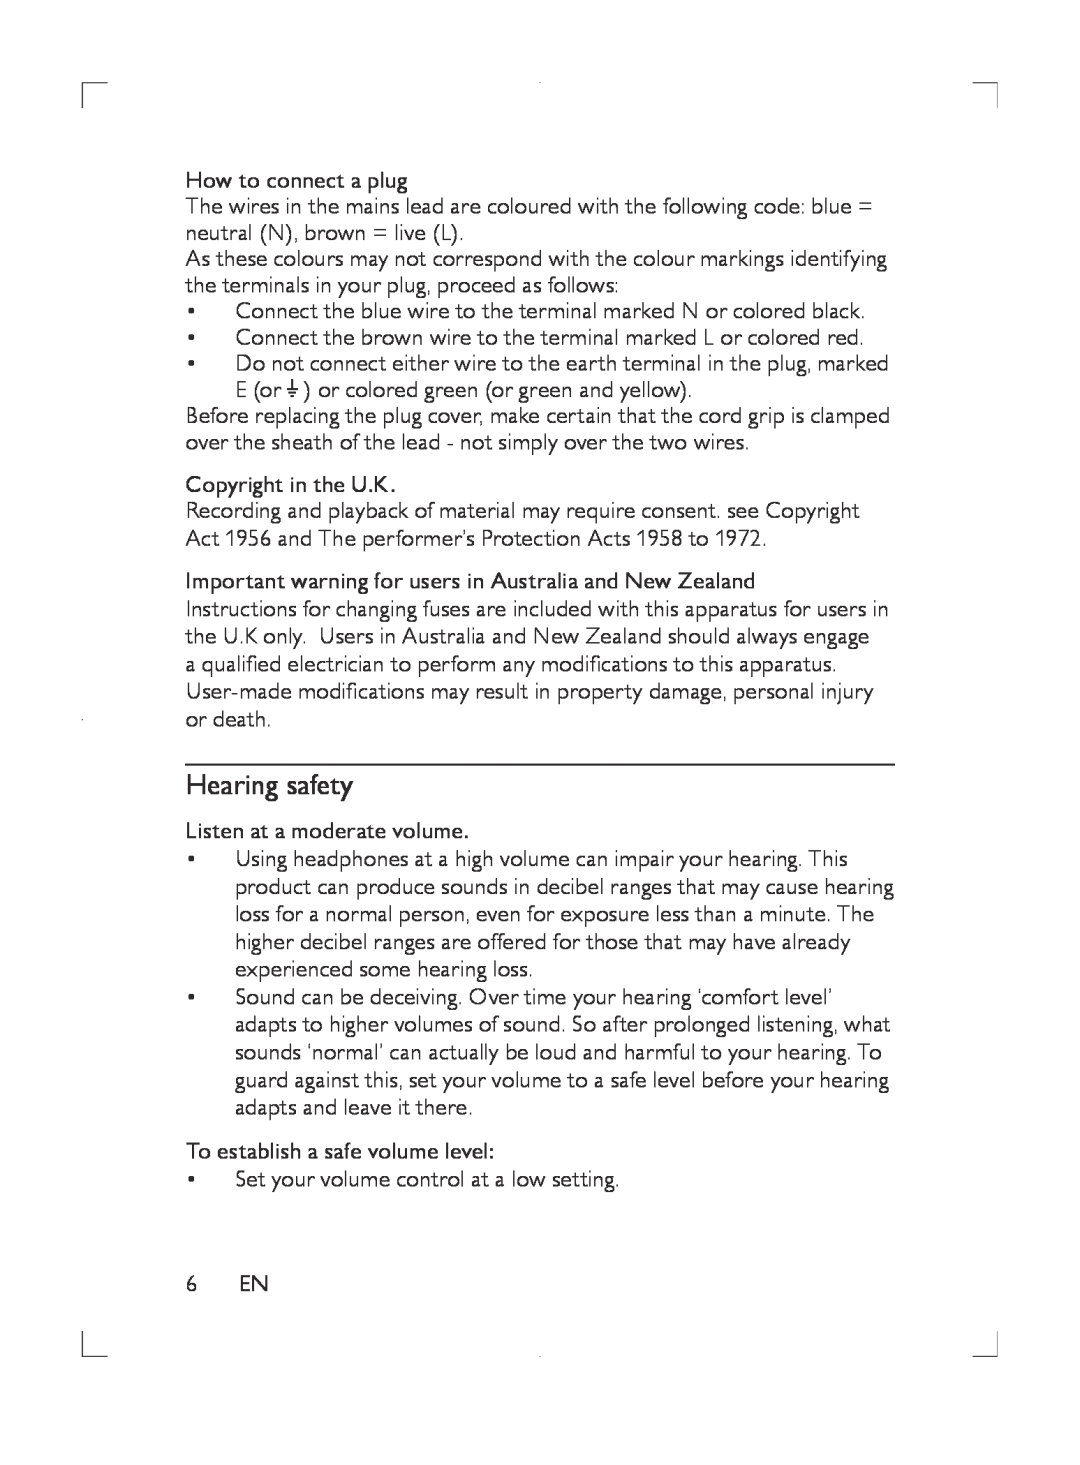 Philips DS8550 user manual Hearing safety 